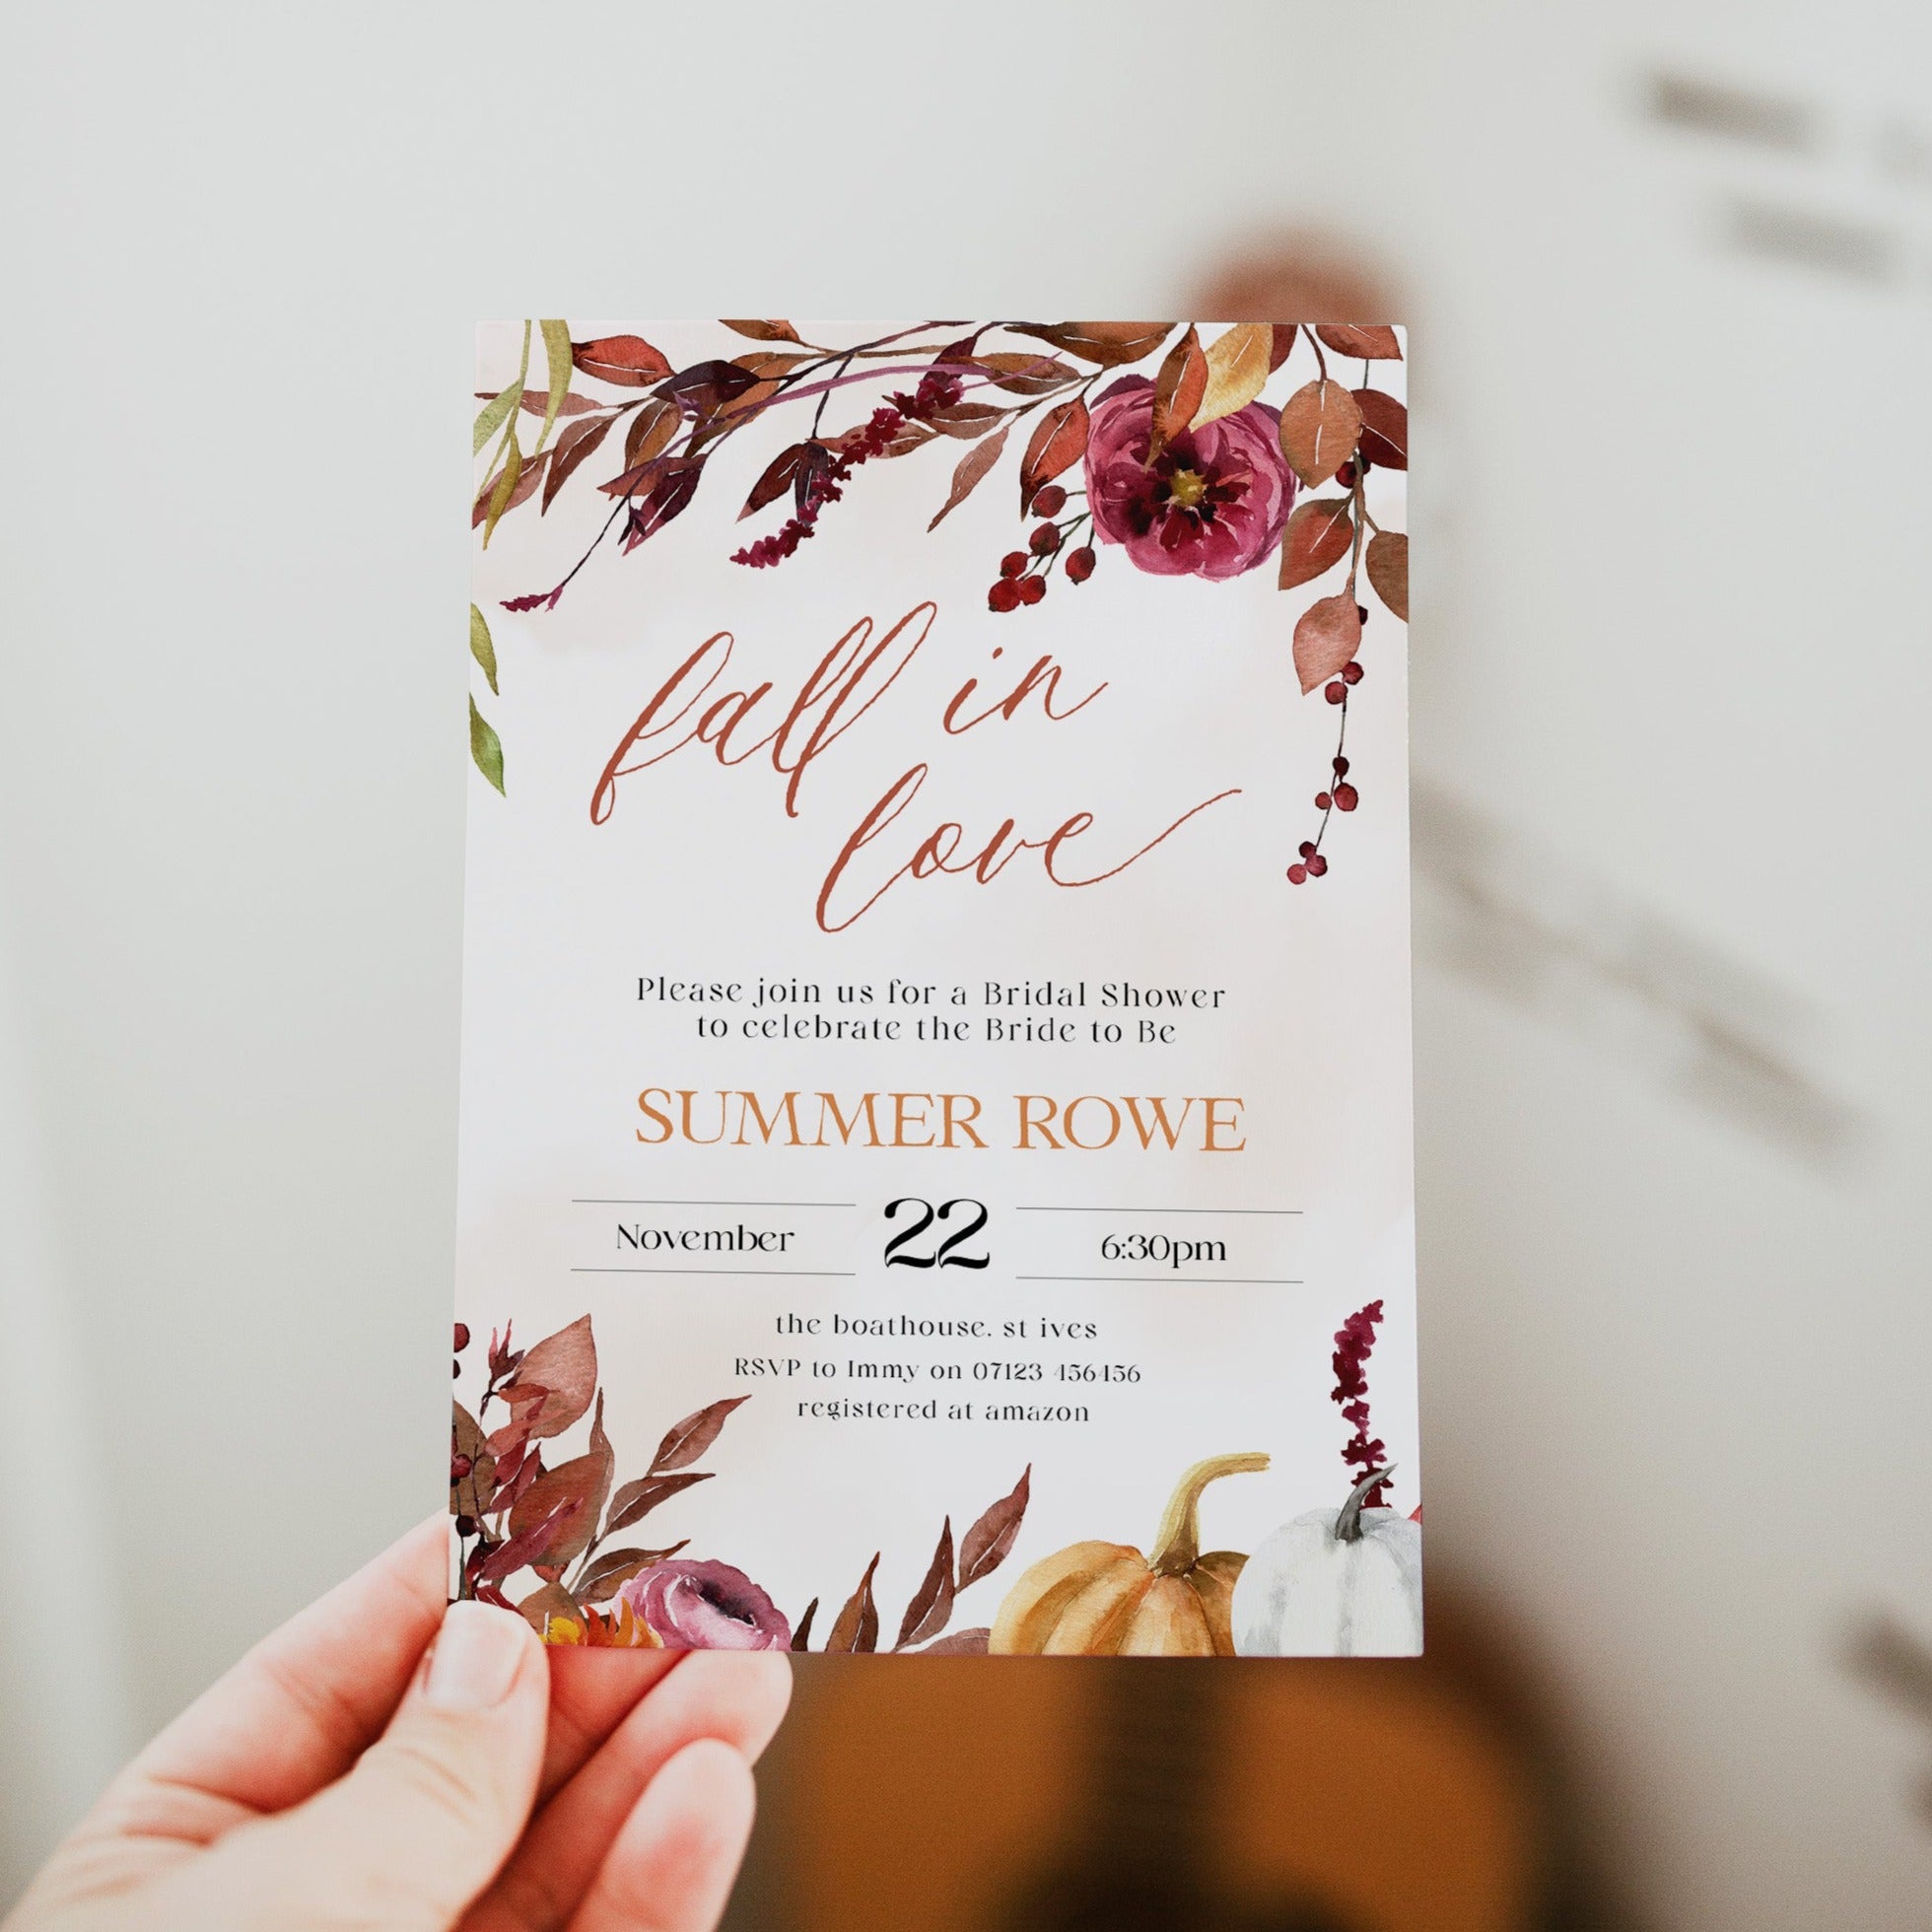 Fully editable and printable bridal shower invitation with a Fall design. Perfect for a fall floral bridal shower